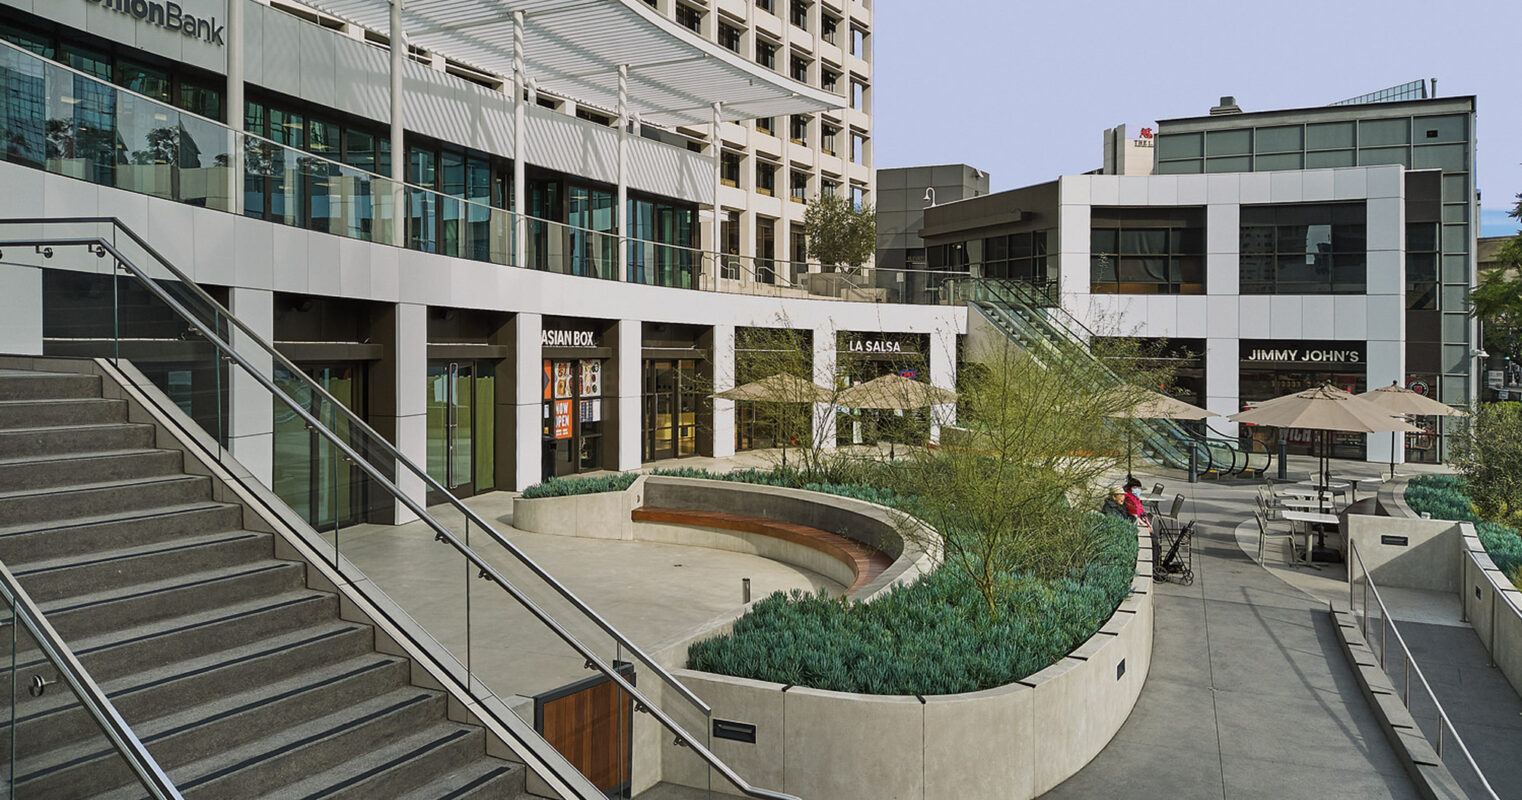 Modern urban plaza featuring tiered concrete steps leading to a central seating area with curved planters, surrounded by contemporary buildings and retail facades.